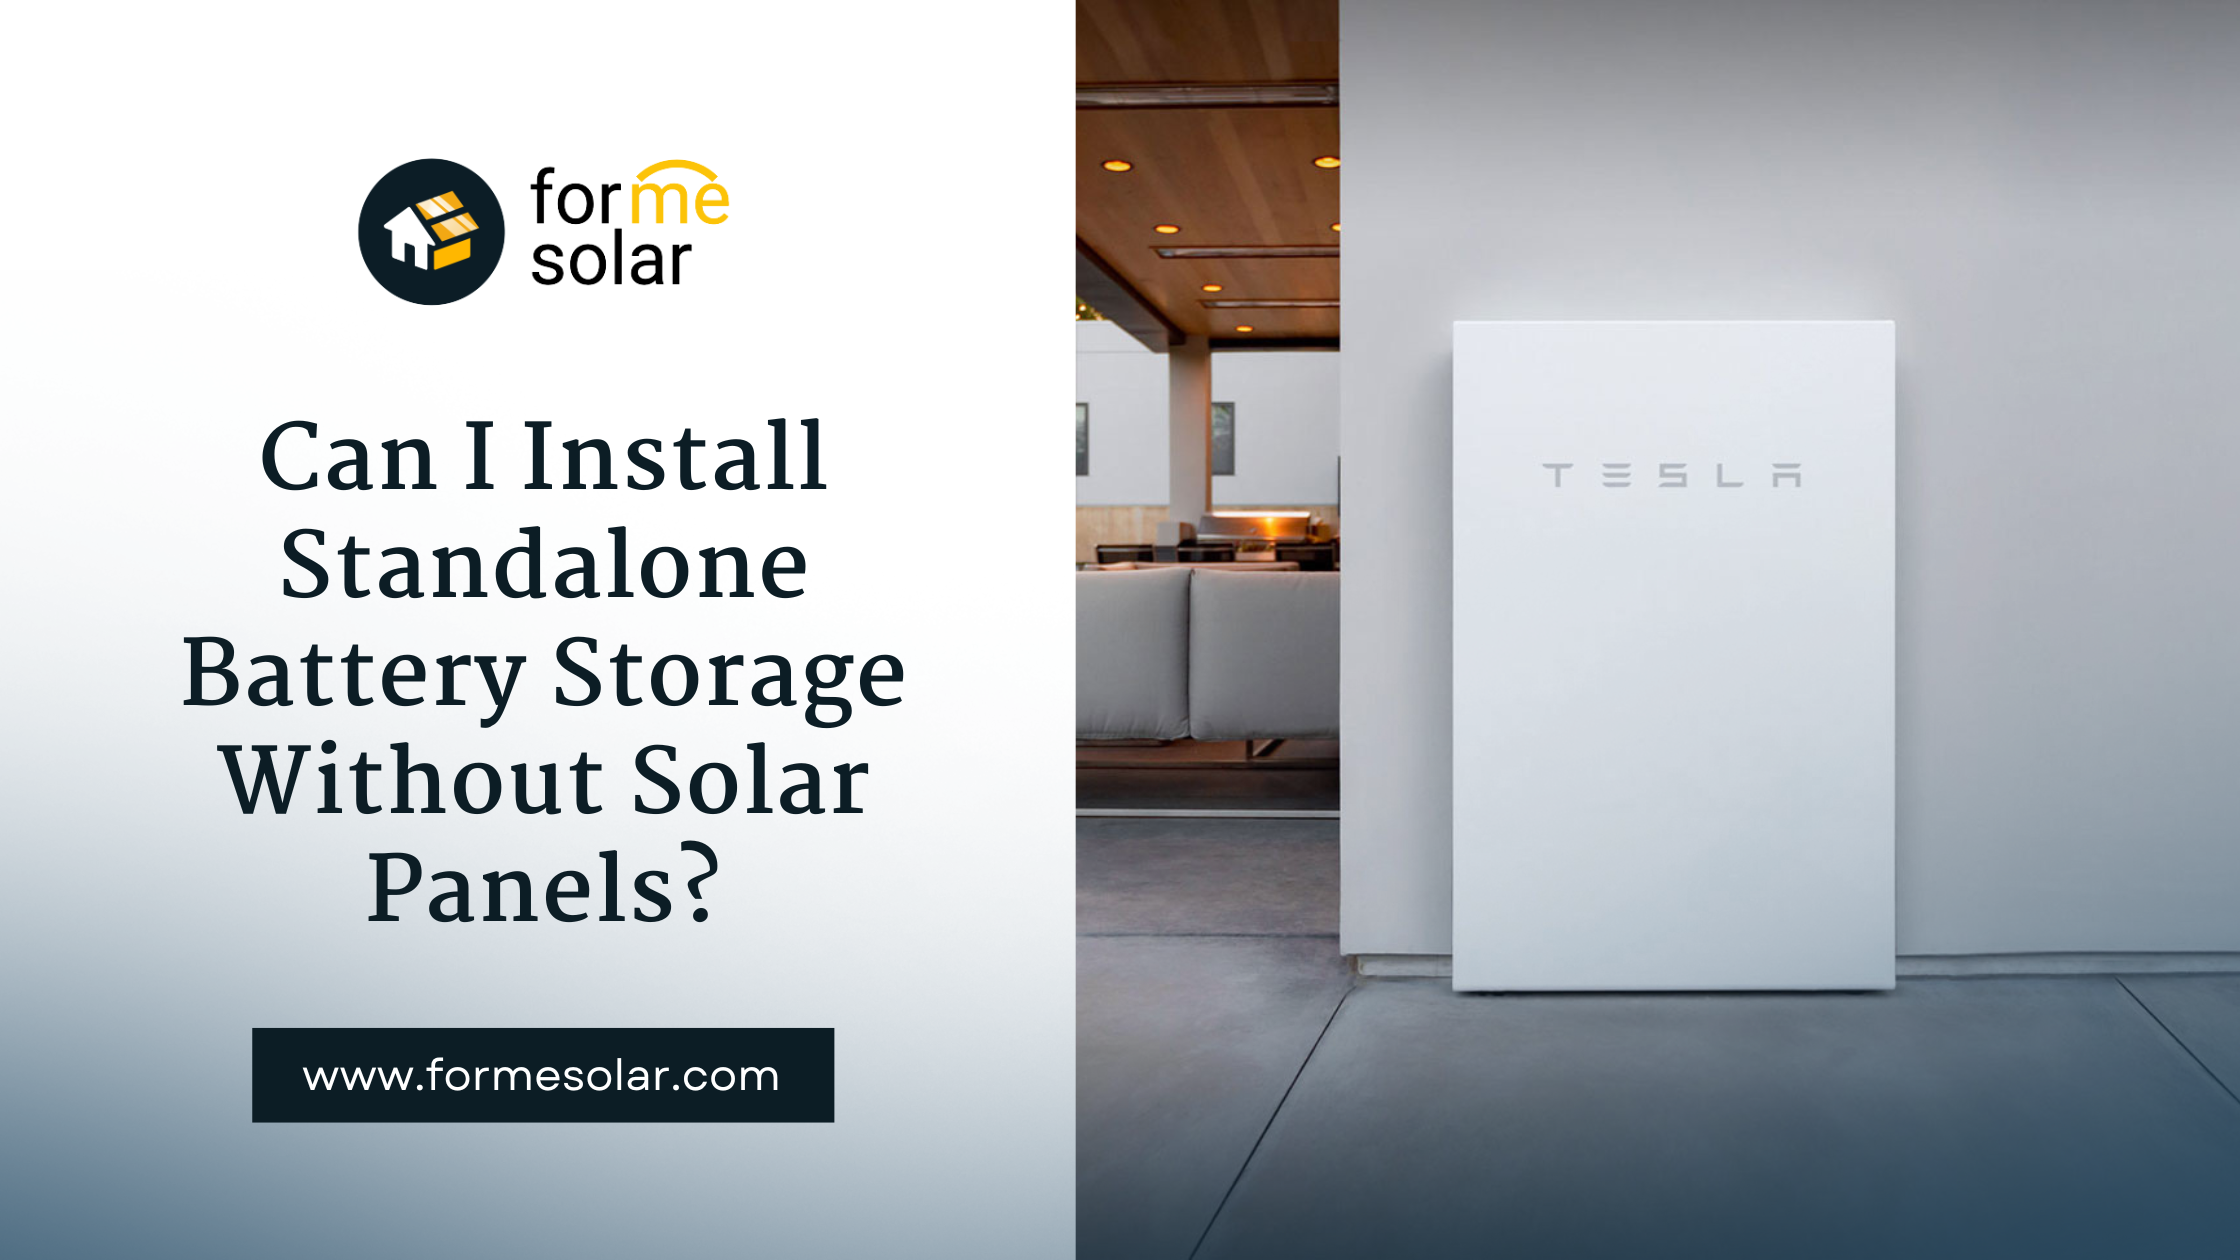 Solar installer said solar batteries are not financially worth it